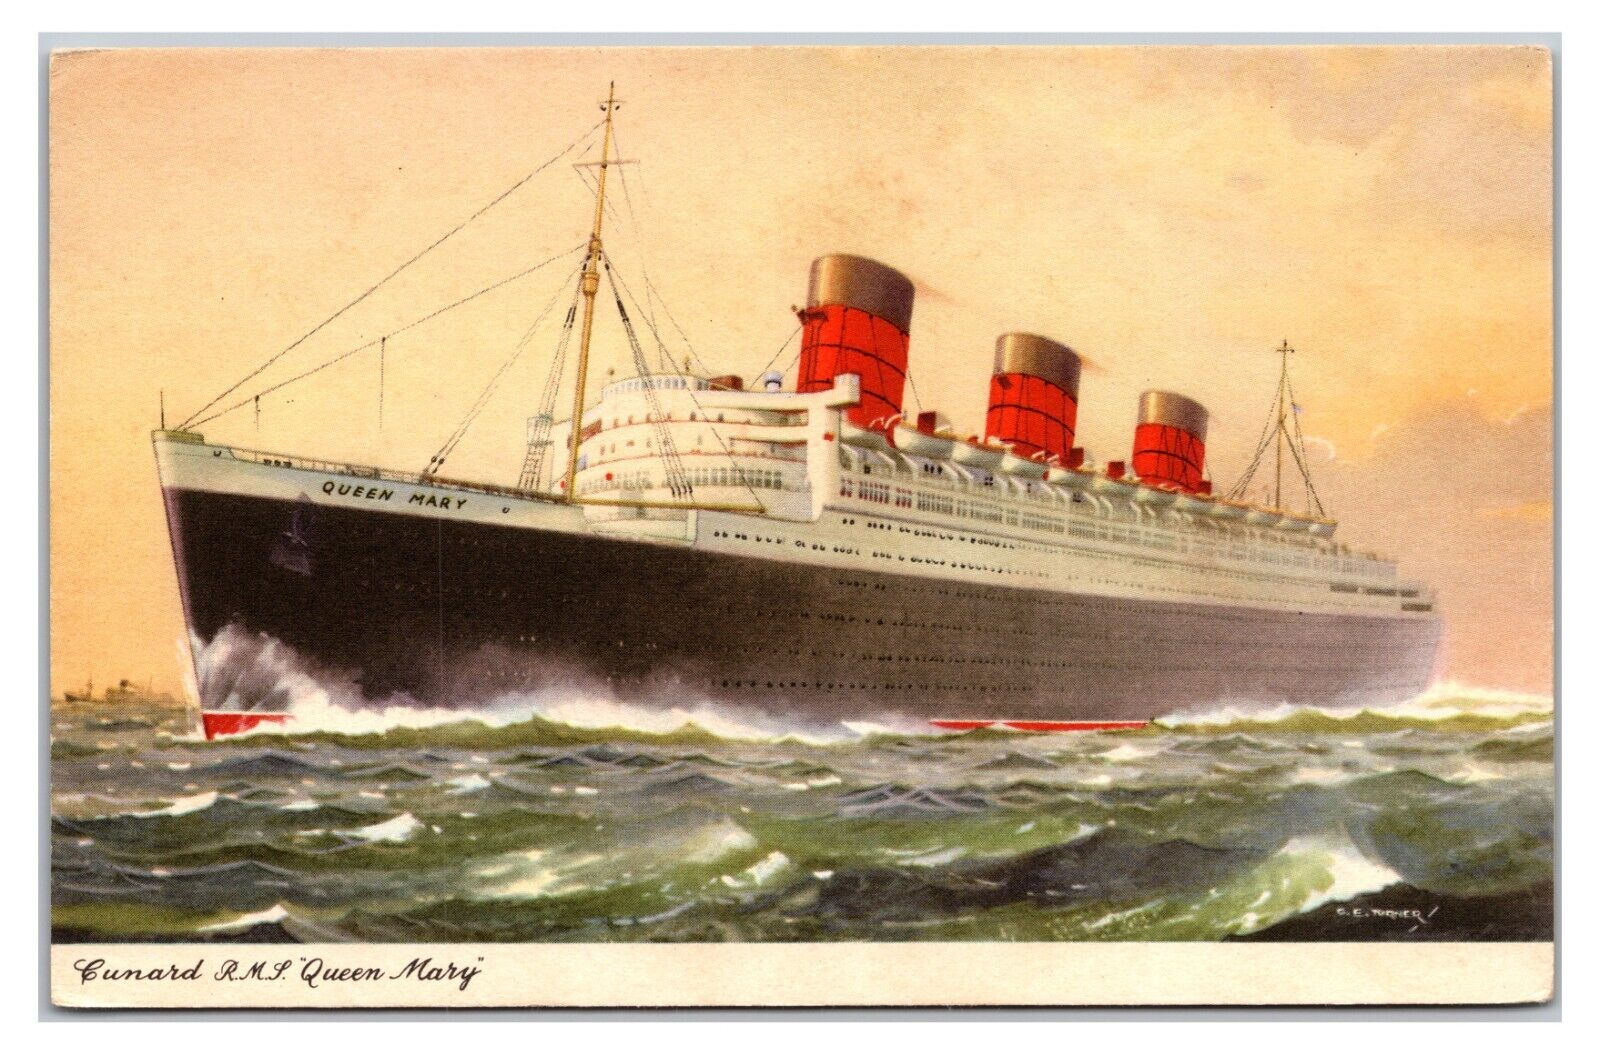 VTG 1930s - Cunard R.M.S. Queen Mary Ocean Liner - England Postcard (UnPosted)